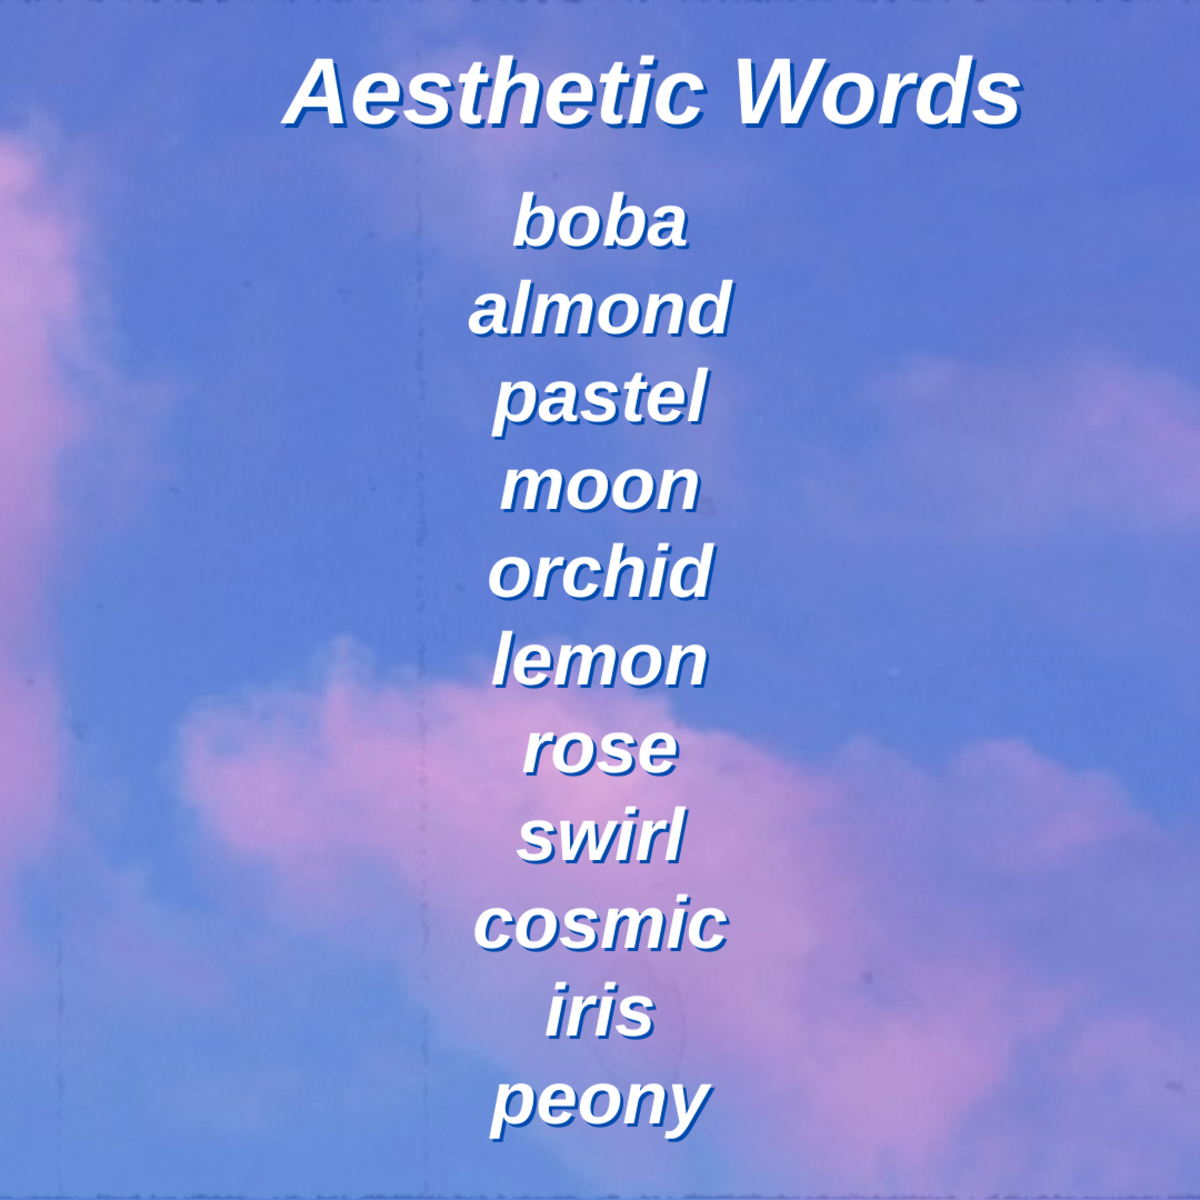 Here are some aesthetic words to help inspire you!